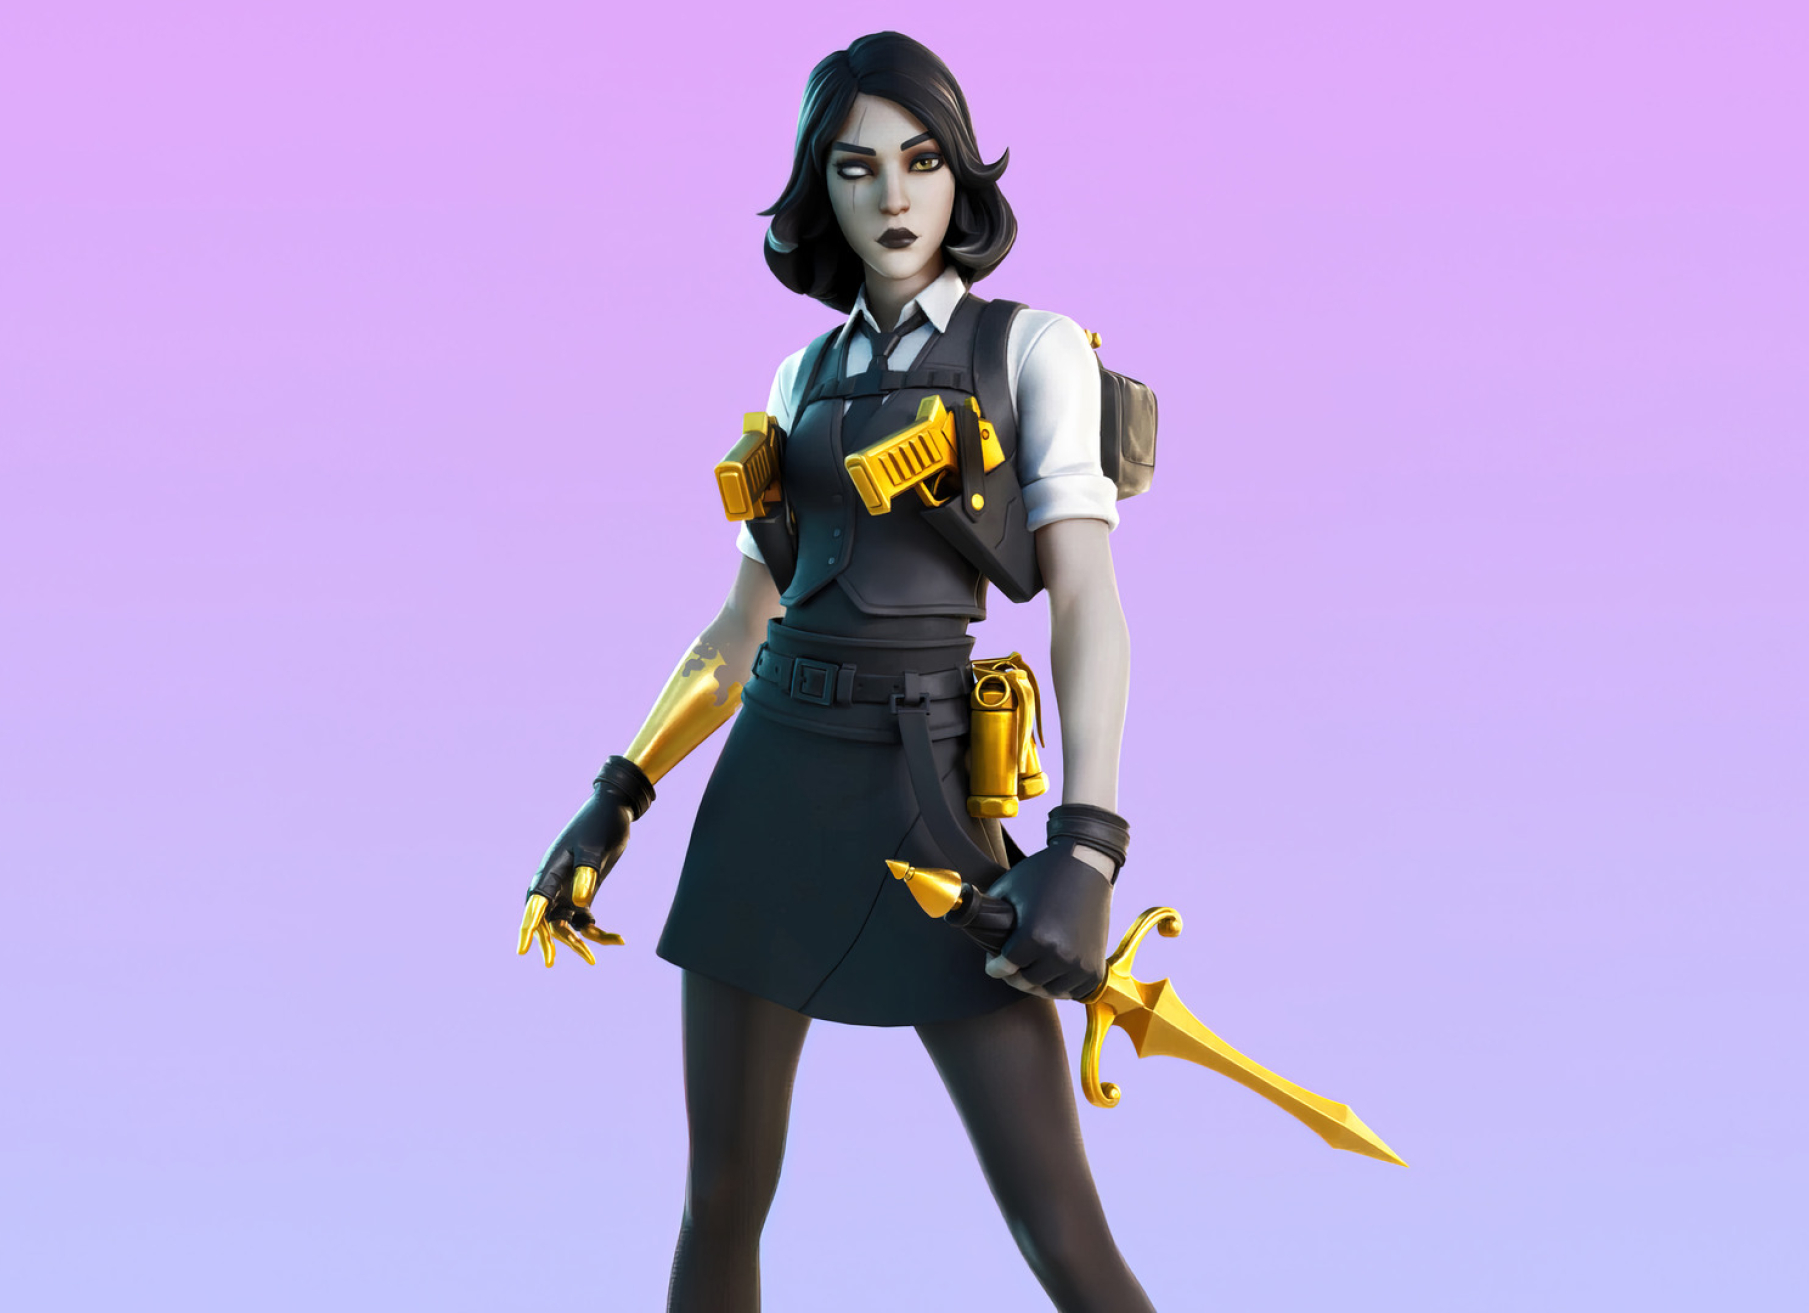 1809x1313 Fortnite Marigold Outfit Skin 1809x1313 Resolution Wallpaper ...